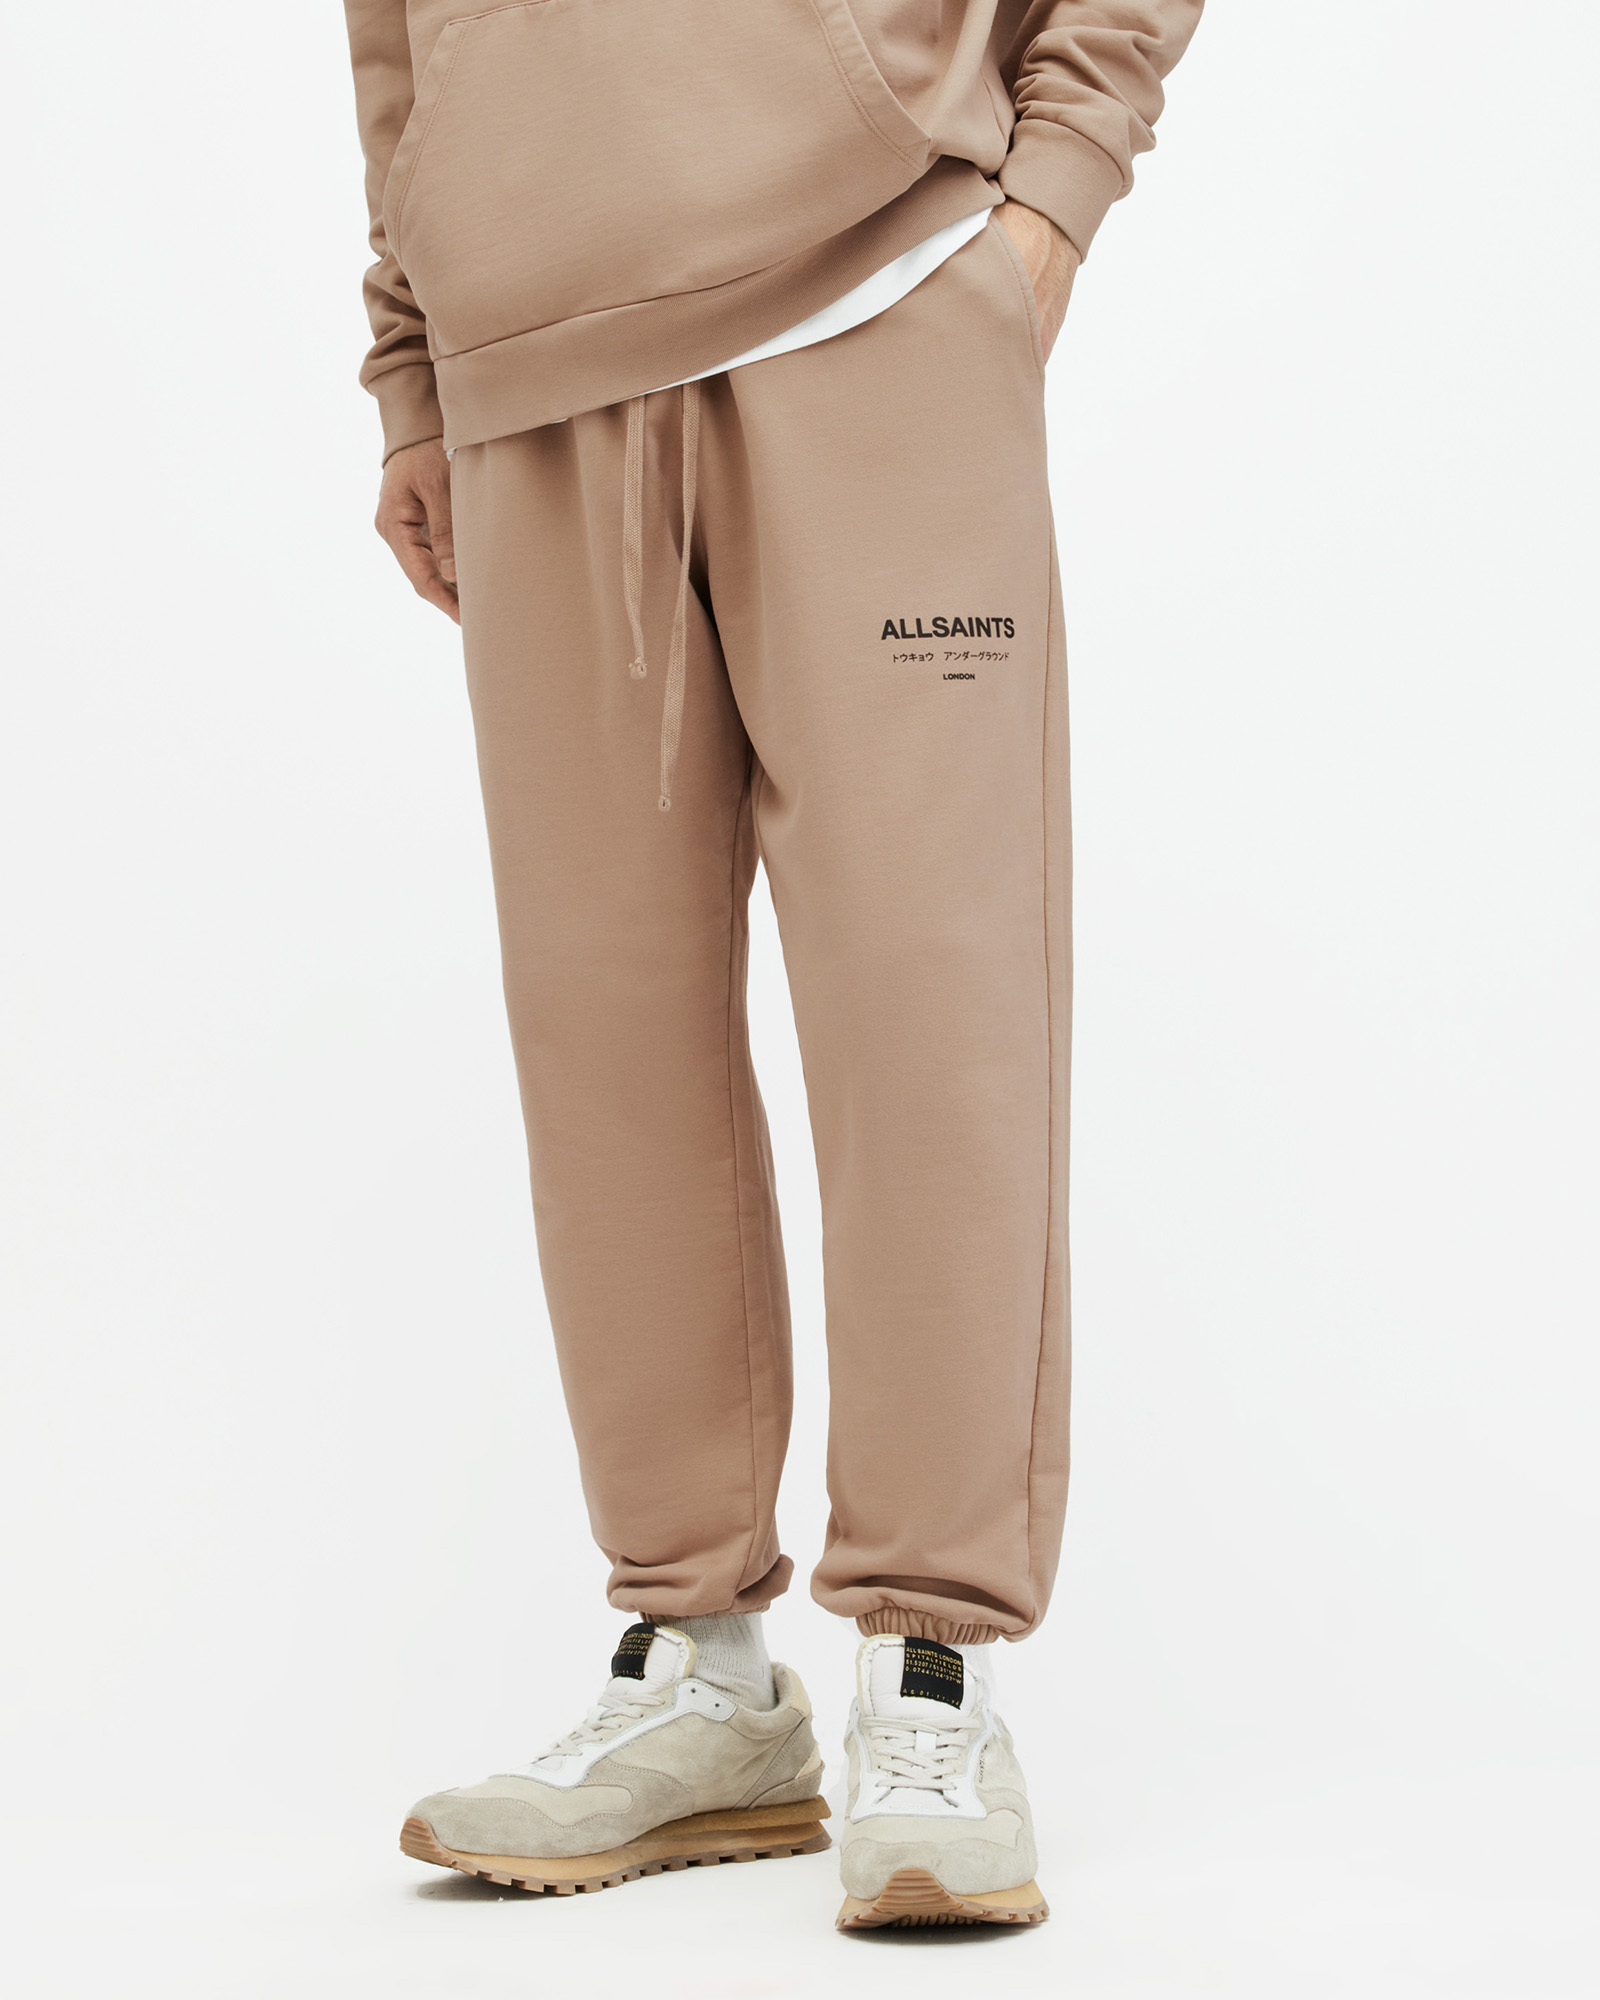 Jogger Pants GUESS All Over Logo Sweatpants Brown